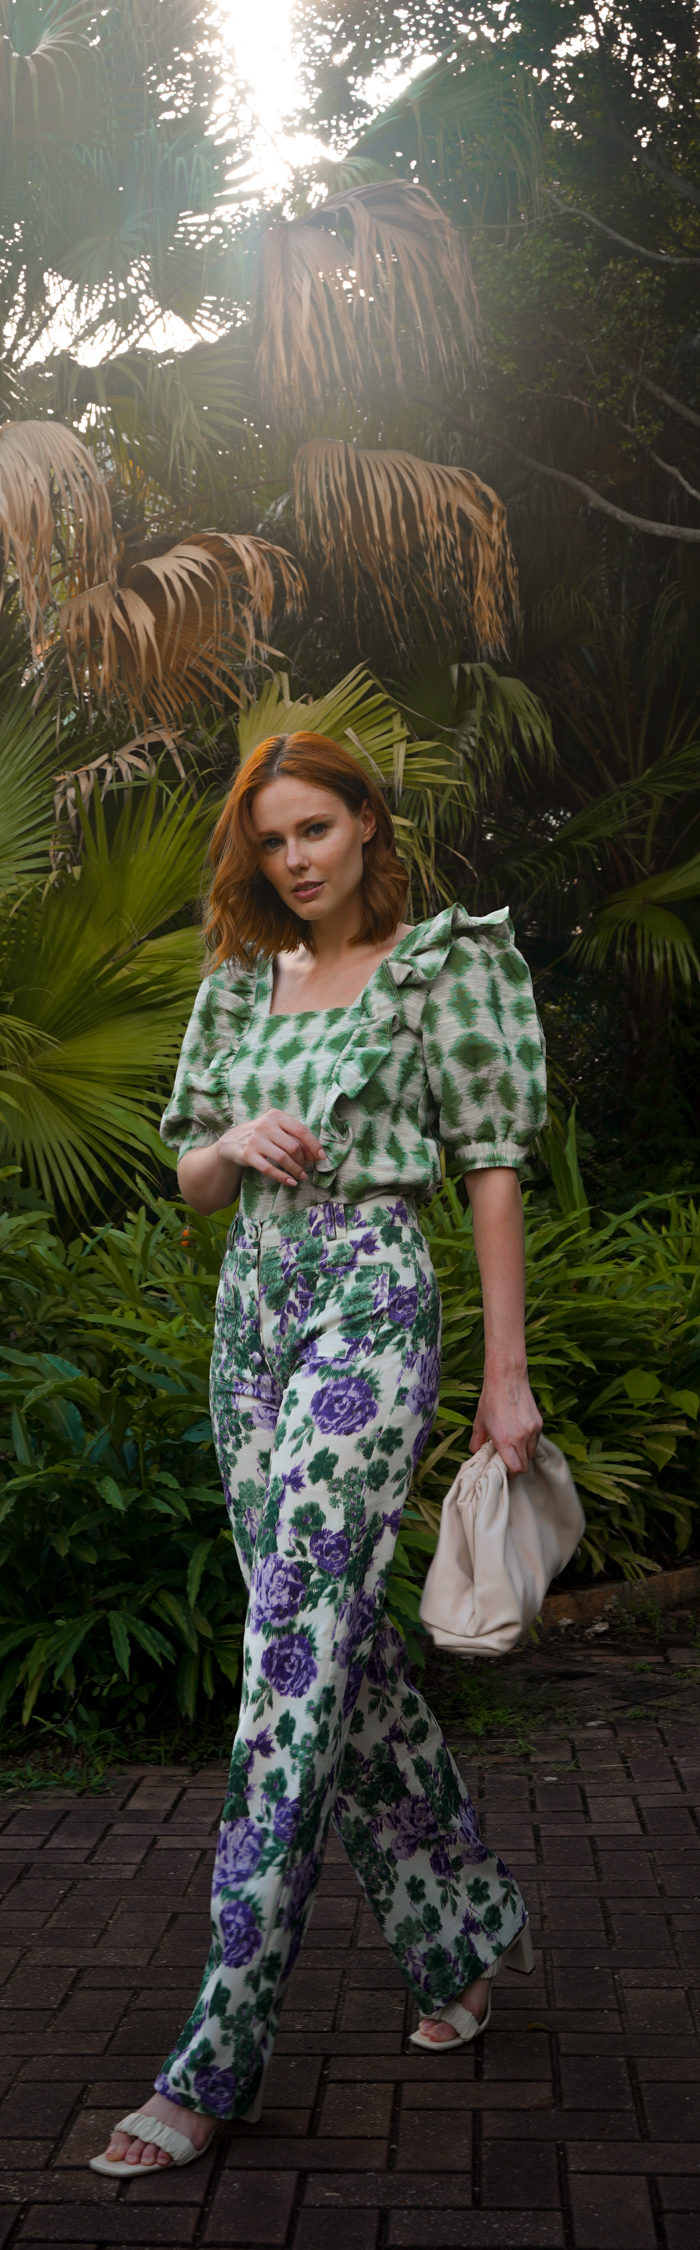 Miss USA 2011 Alyssa Campanella of The A List blog shares her favorite Sézane pieces on the last days of summer